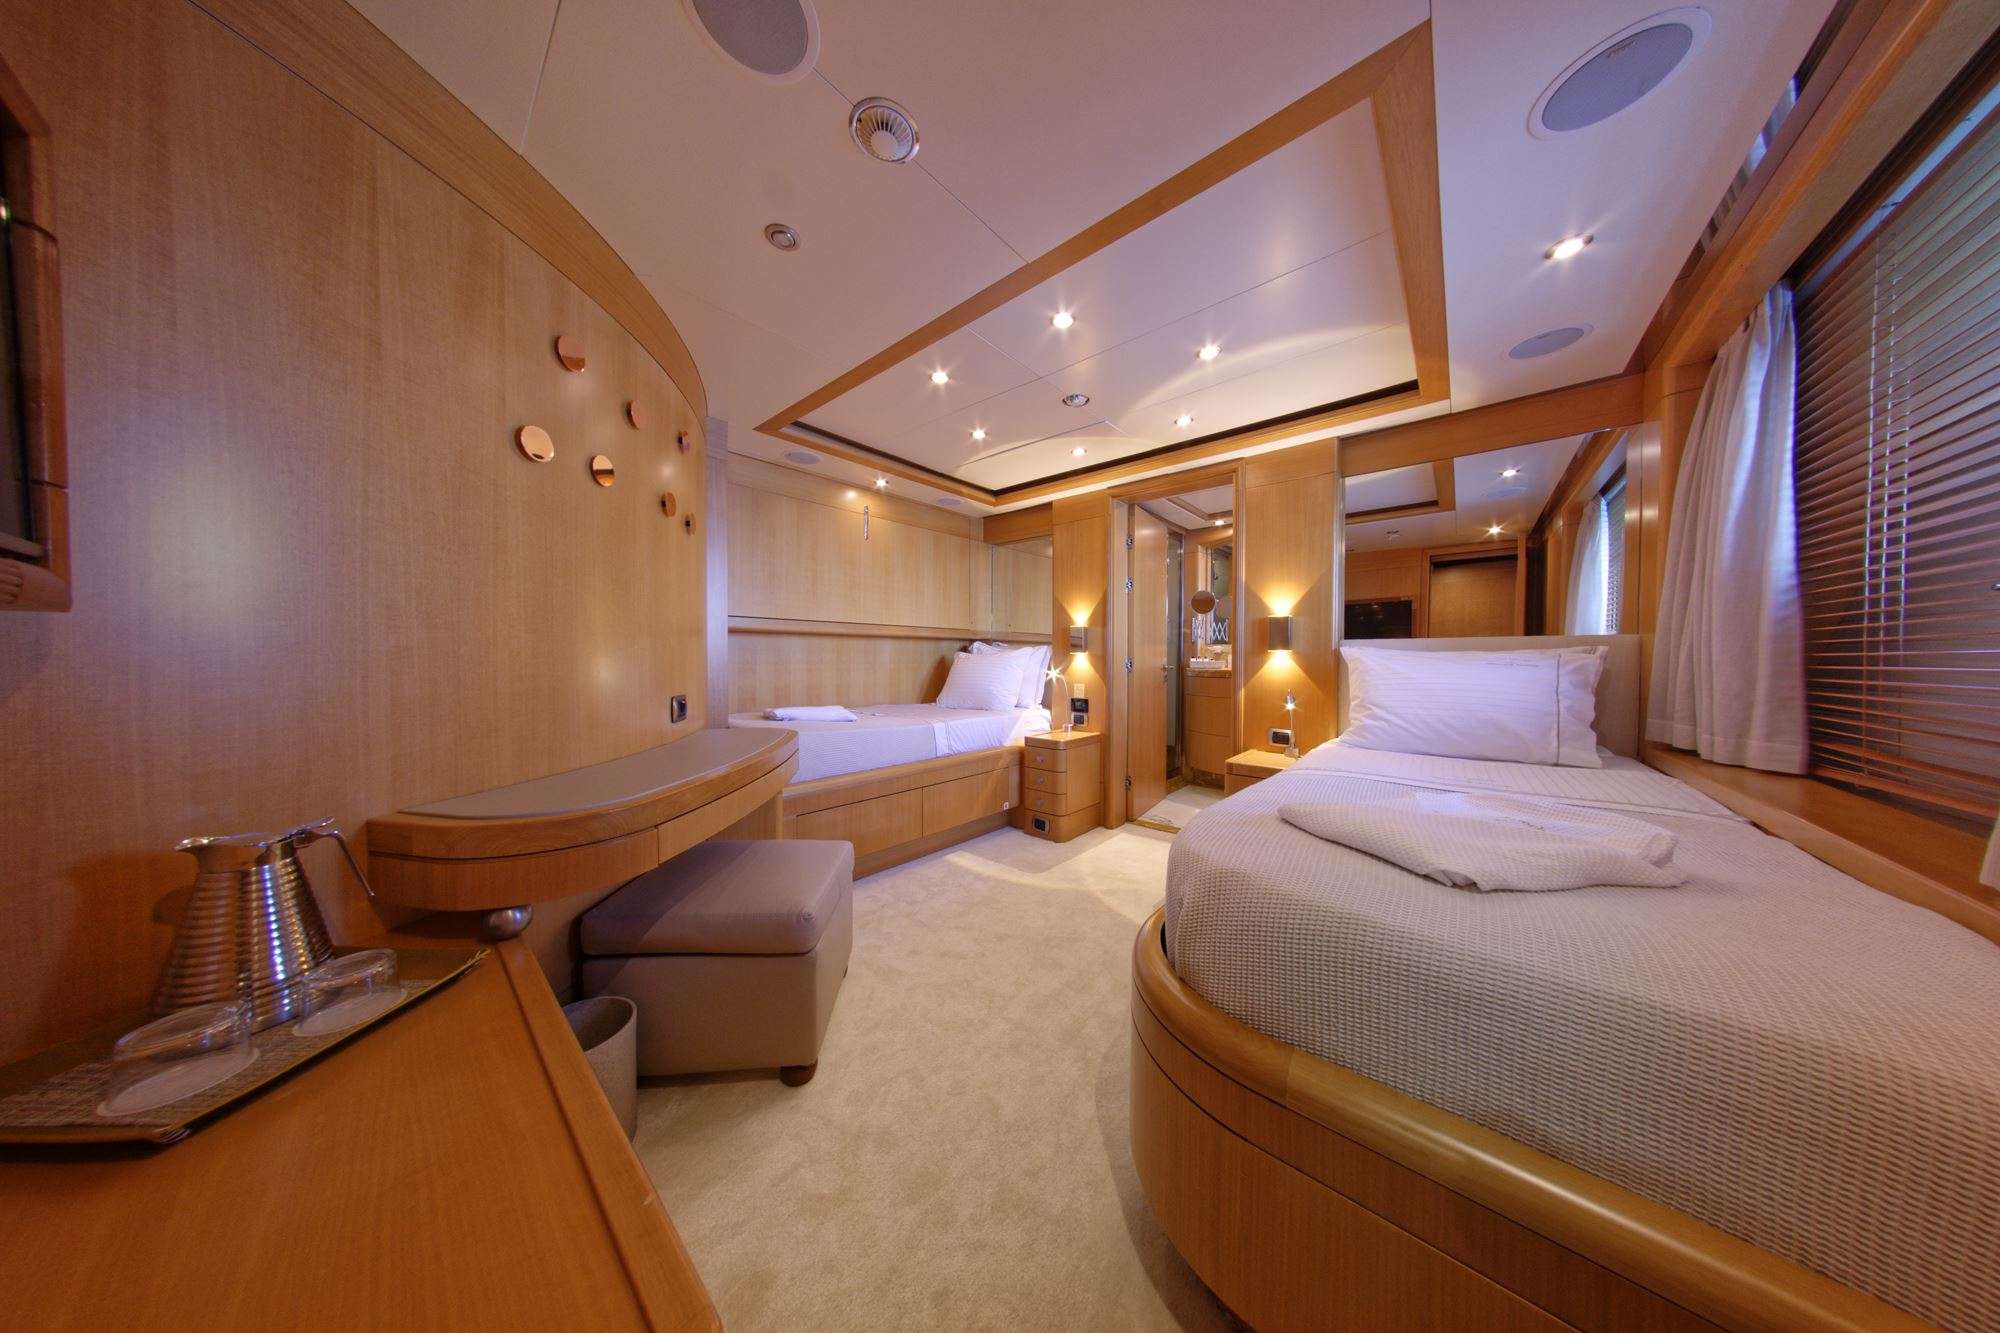 GRANDE AMORE Yacht Charter - One of the 2 almost identical Twin cabins, with pullman beds, on Lower Deck